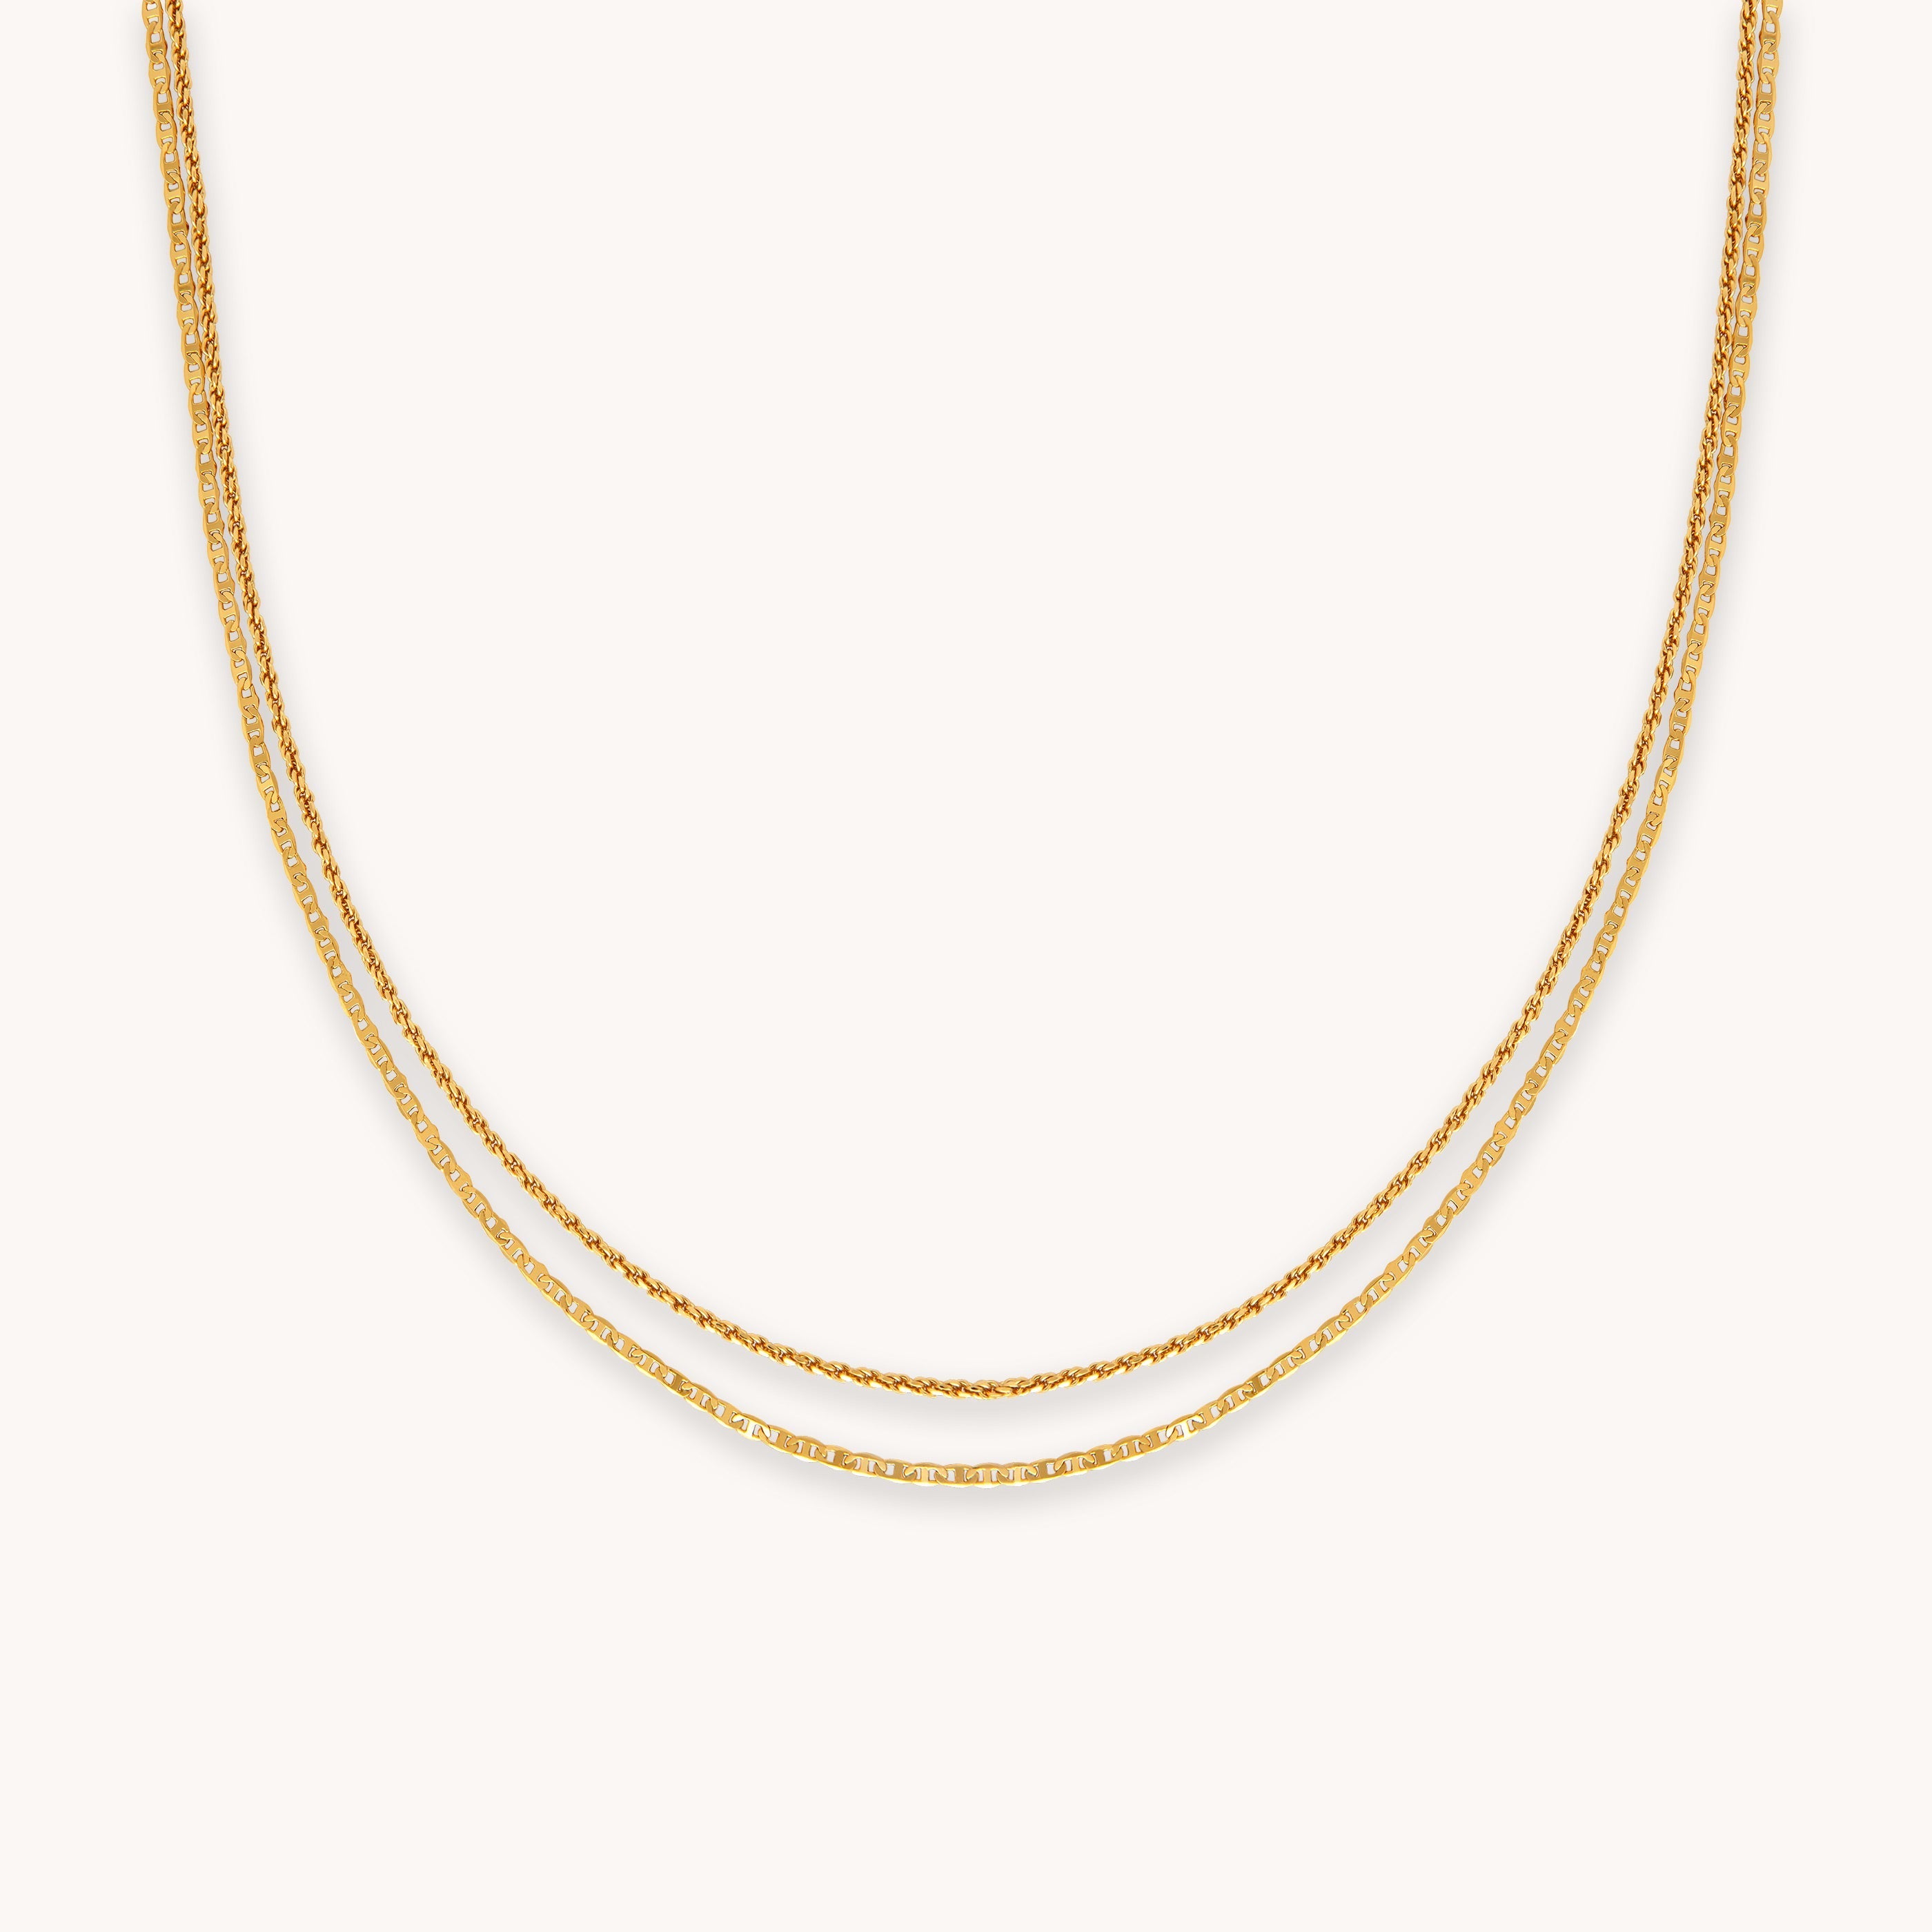 Double Chain Gold Necklace | Astrid & Miyu Necklaces